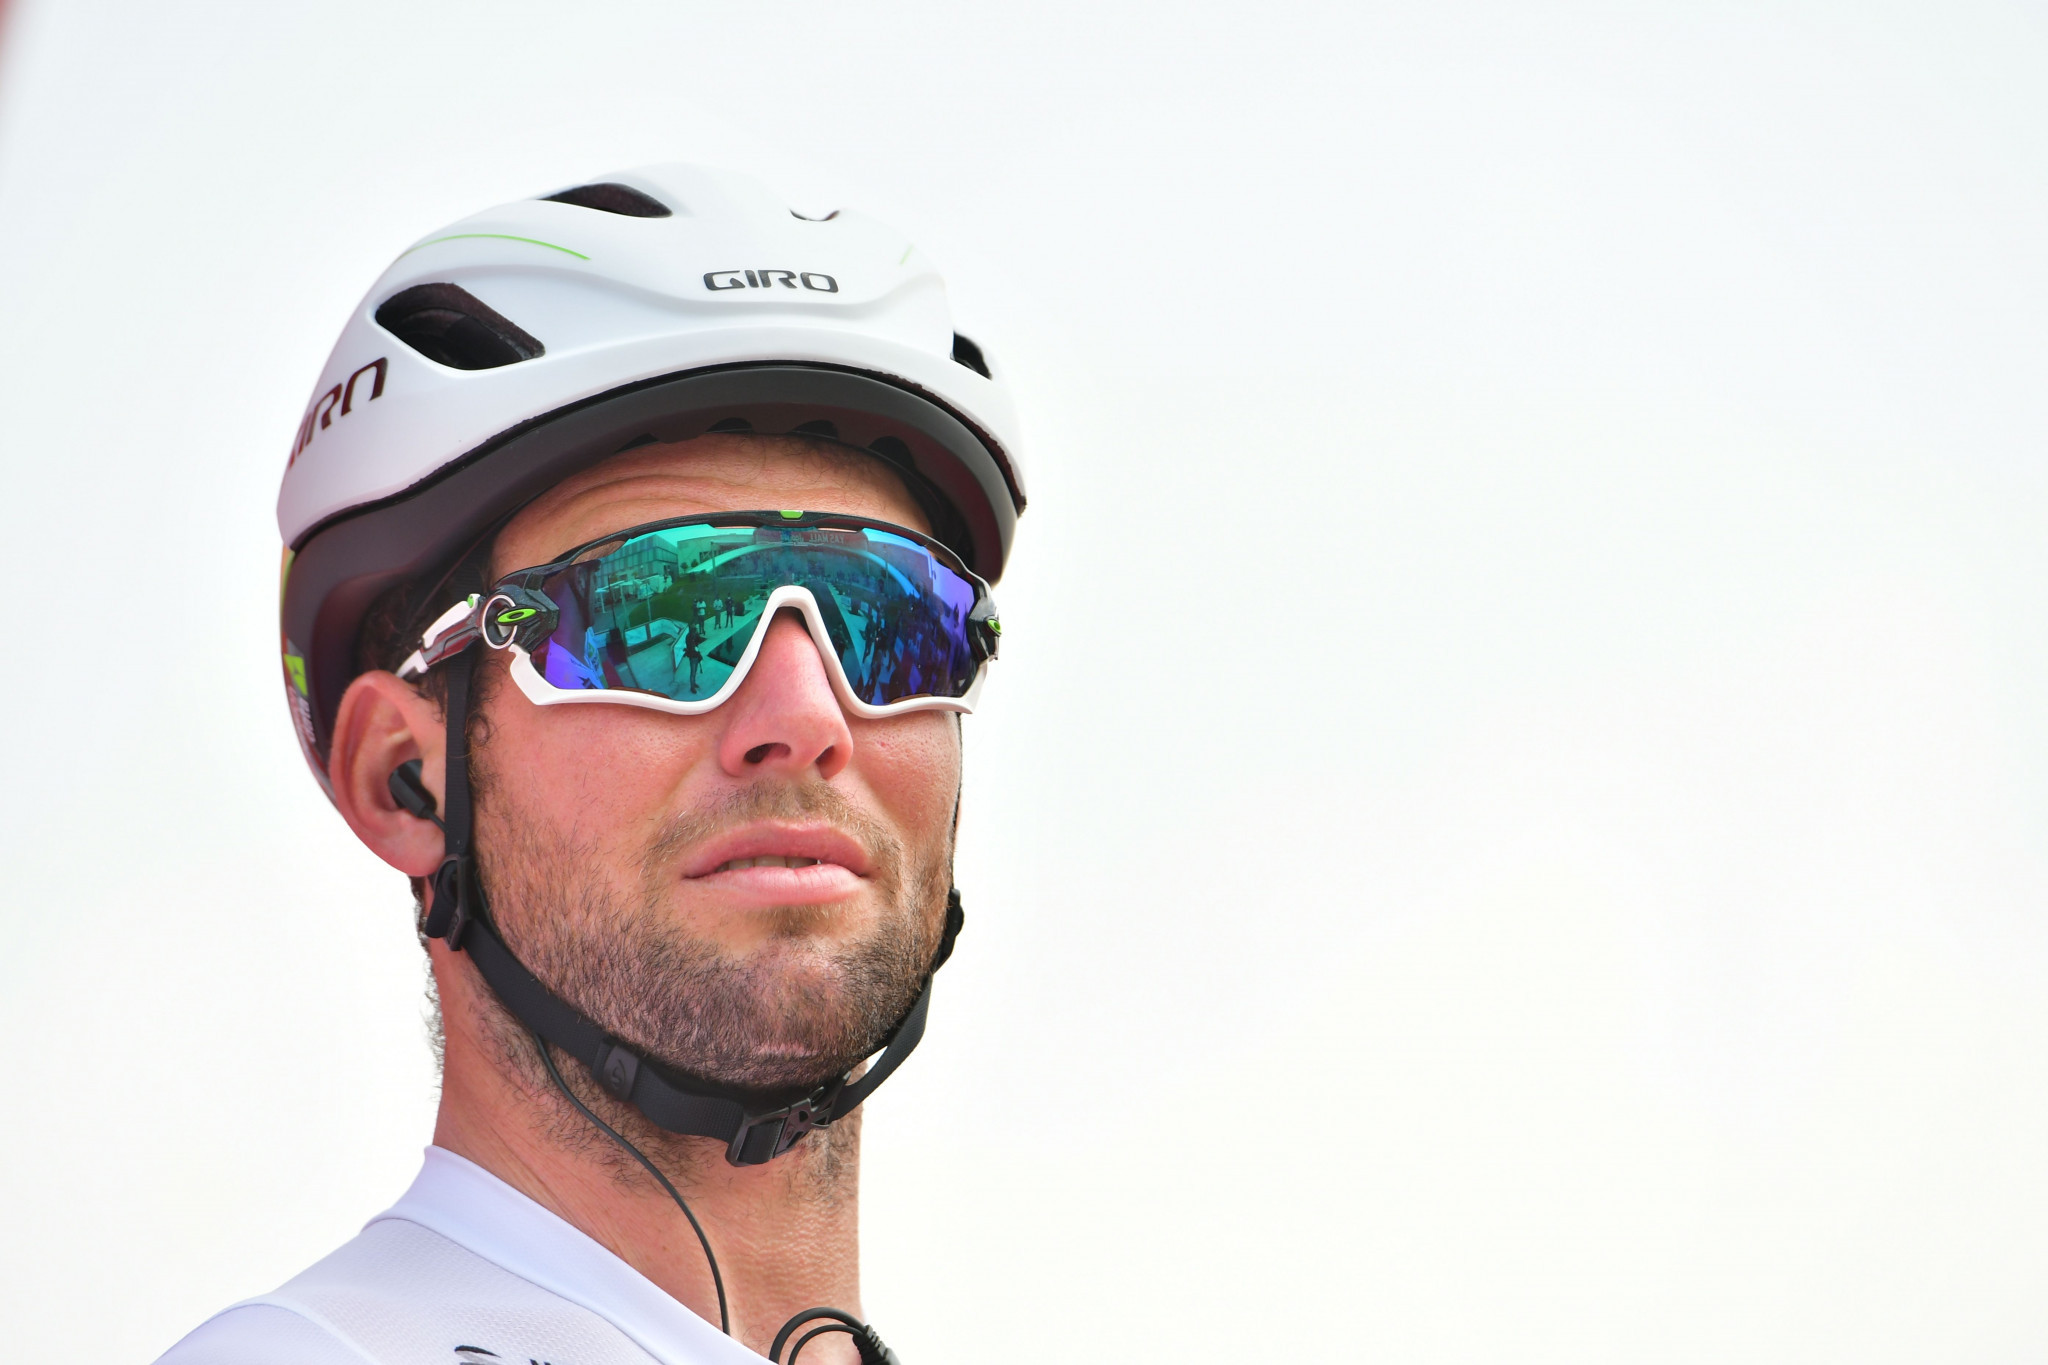 Britain's Mark Cavendish will hope to restart his season at the Presidential Tour of Turkey ©Getty Images